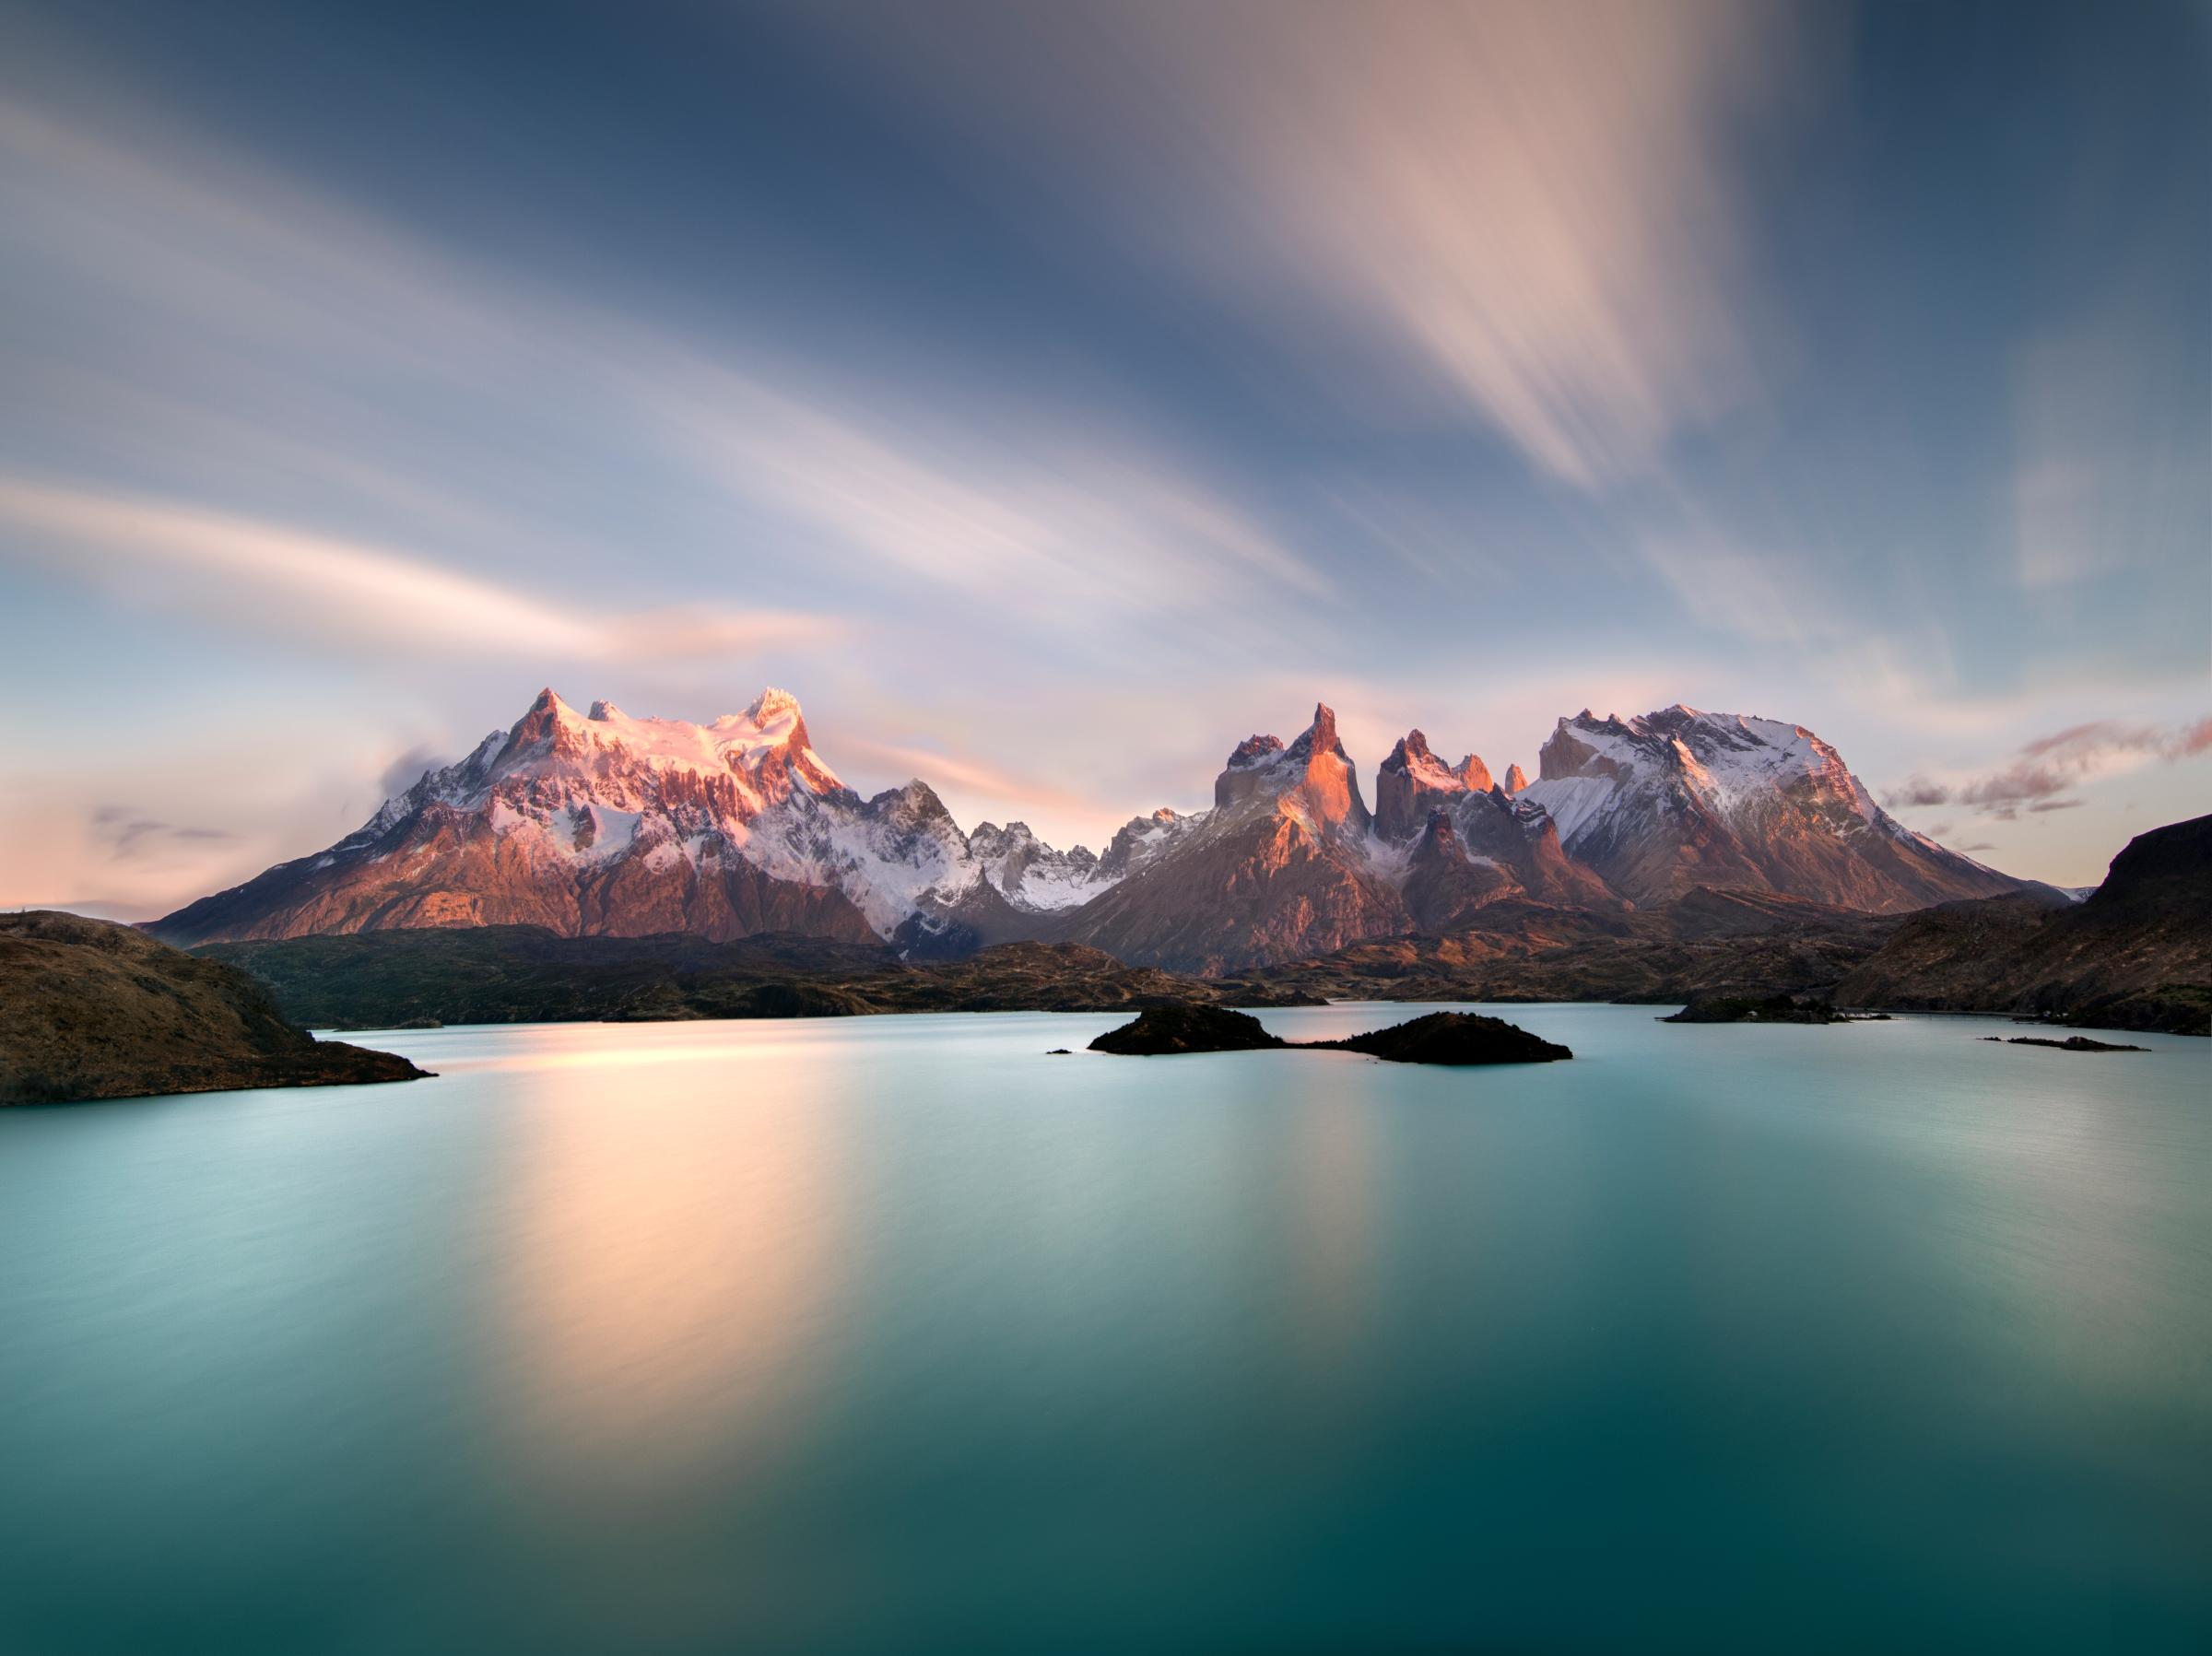 Torres del Paine at sunrise with Pehoe lake